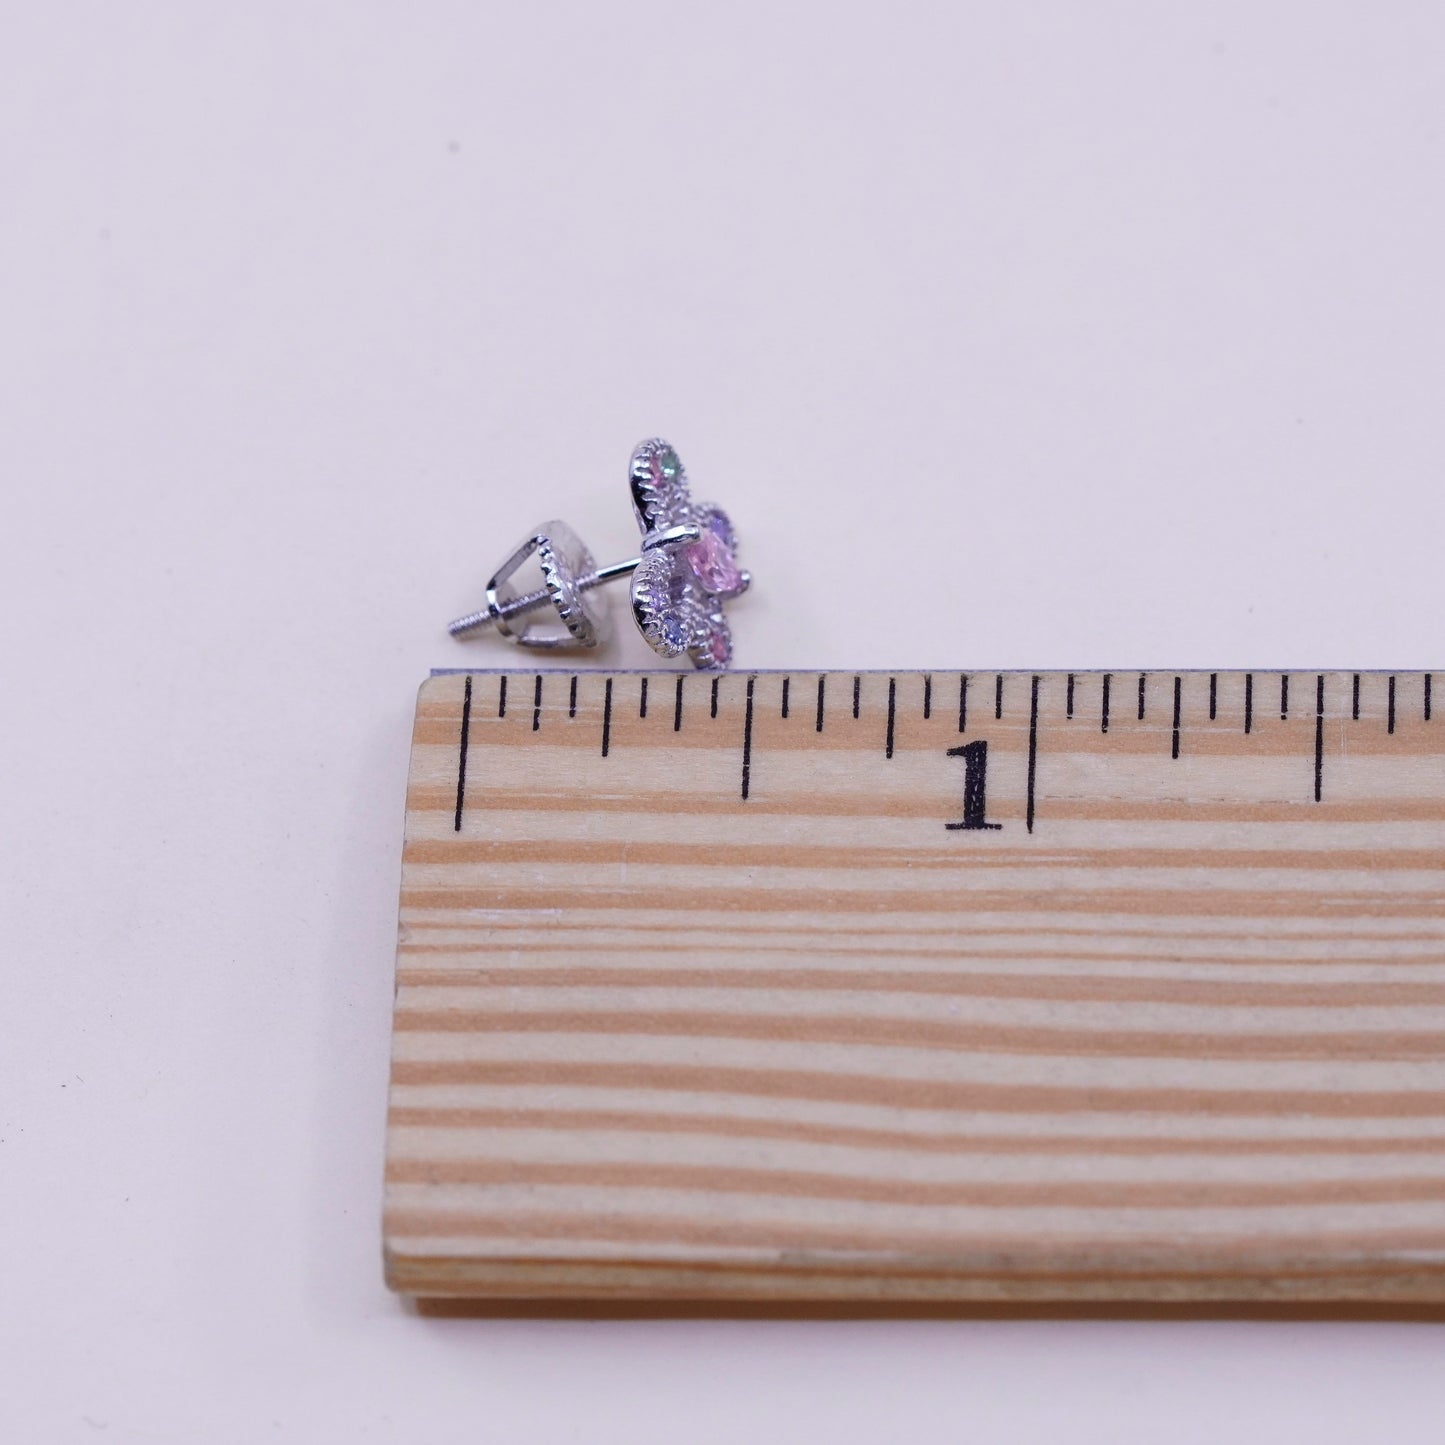 Vintage sterling silver earrings, 925 butterfly studs with pink quartz